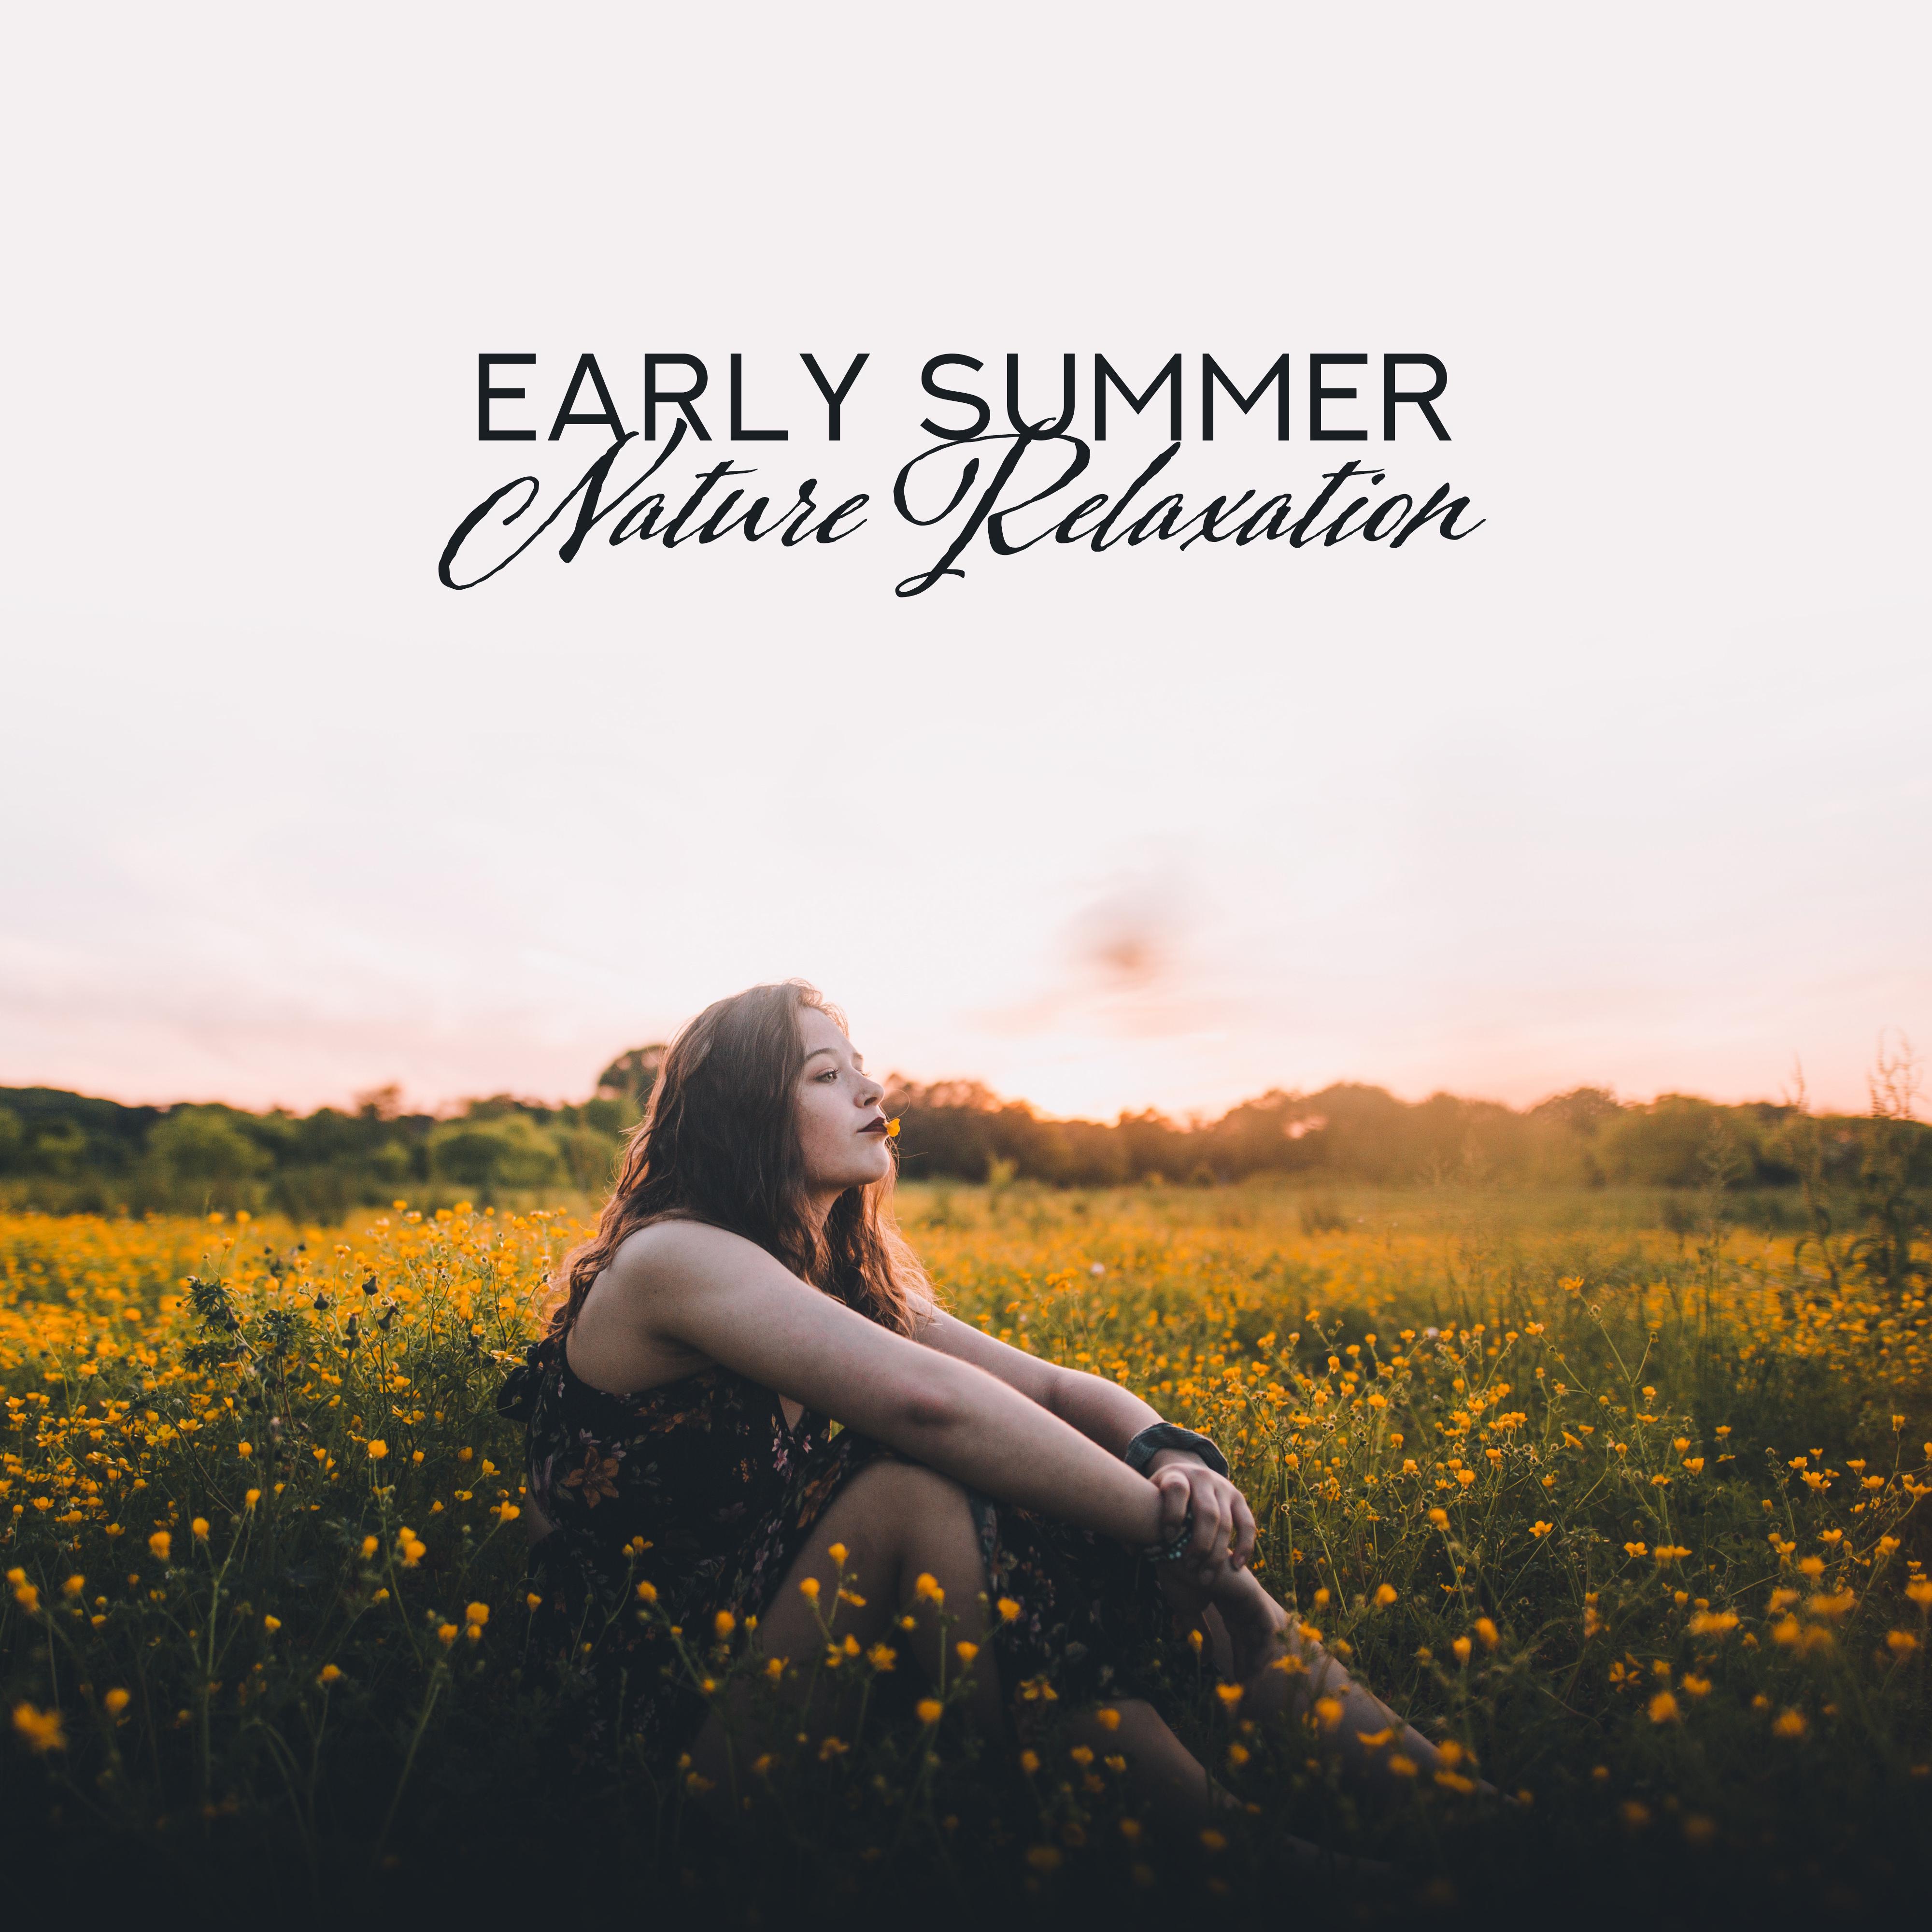 Early Summer Nature Relaxation: Water & Birds Nature New Age 2019 Music for Total Relaxation, Rest Among Nature, Soothing Piano Melodies, Calming Down, Fight with Stress, Sounds of Forest & Meadow